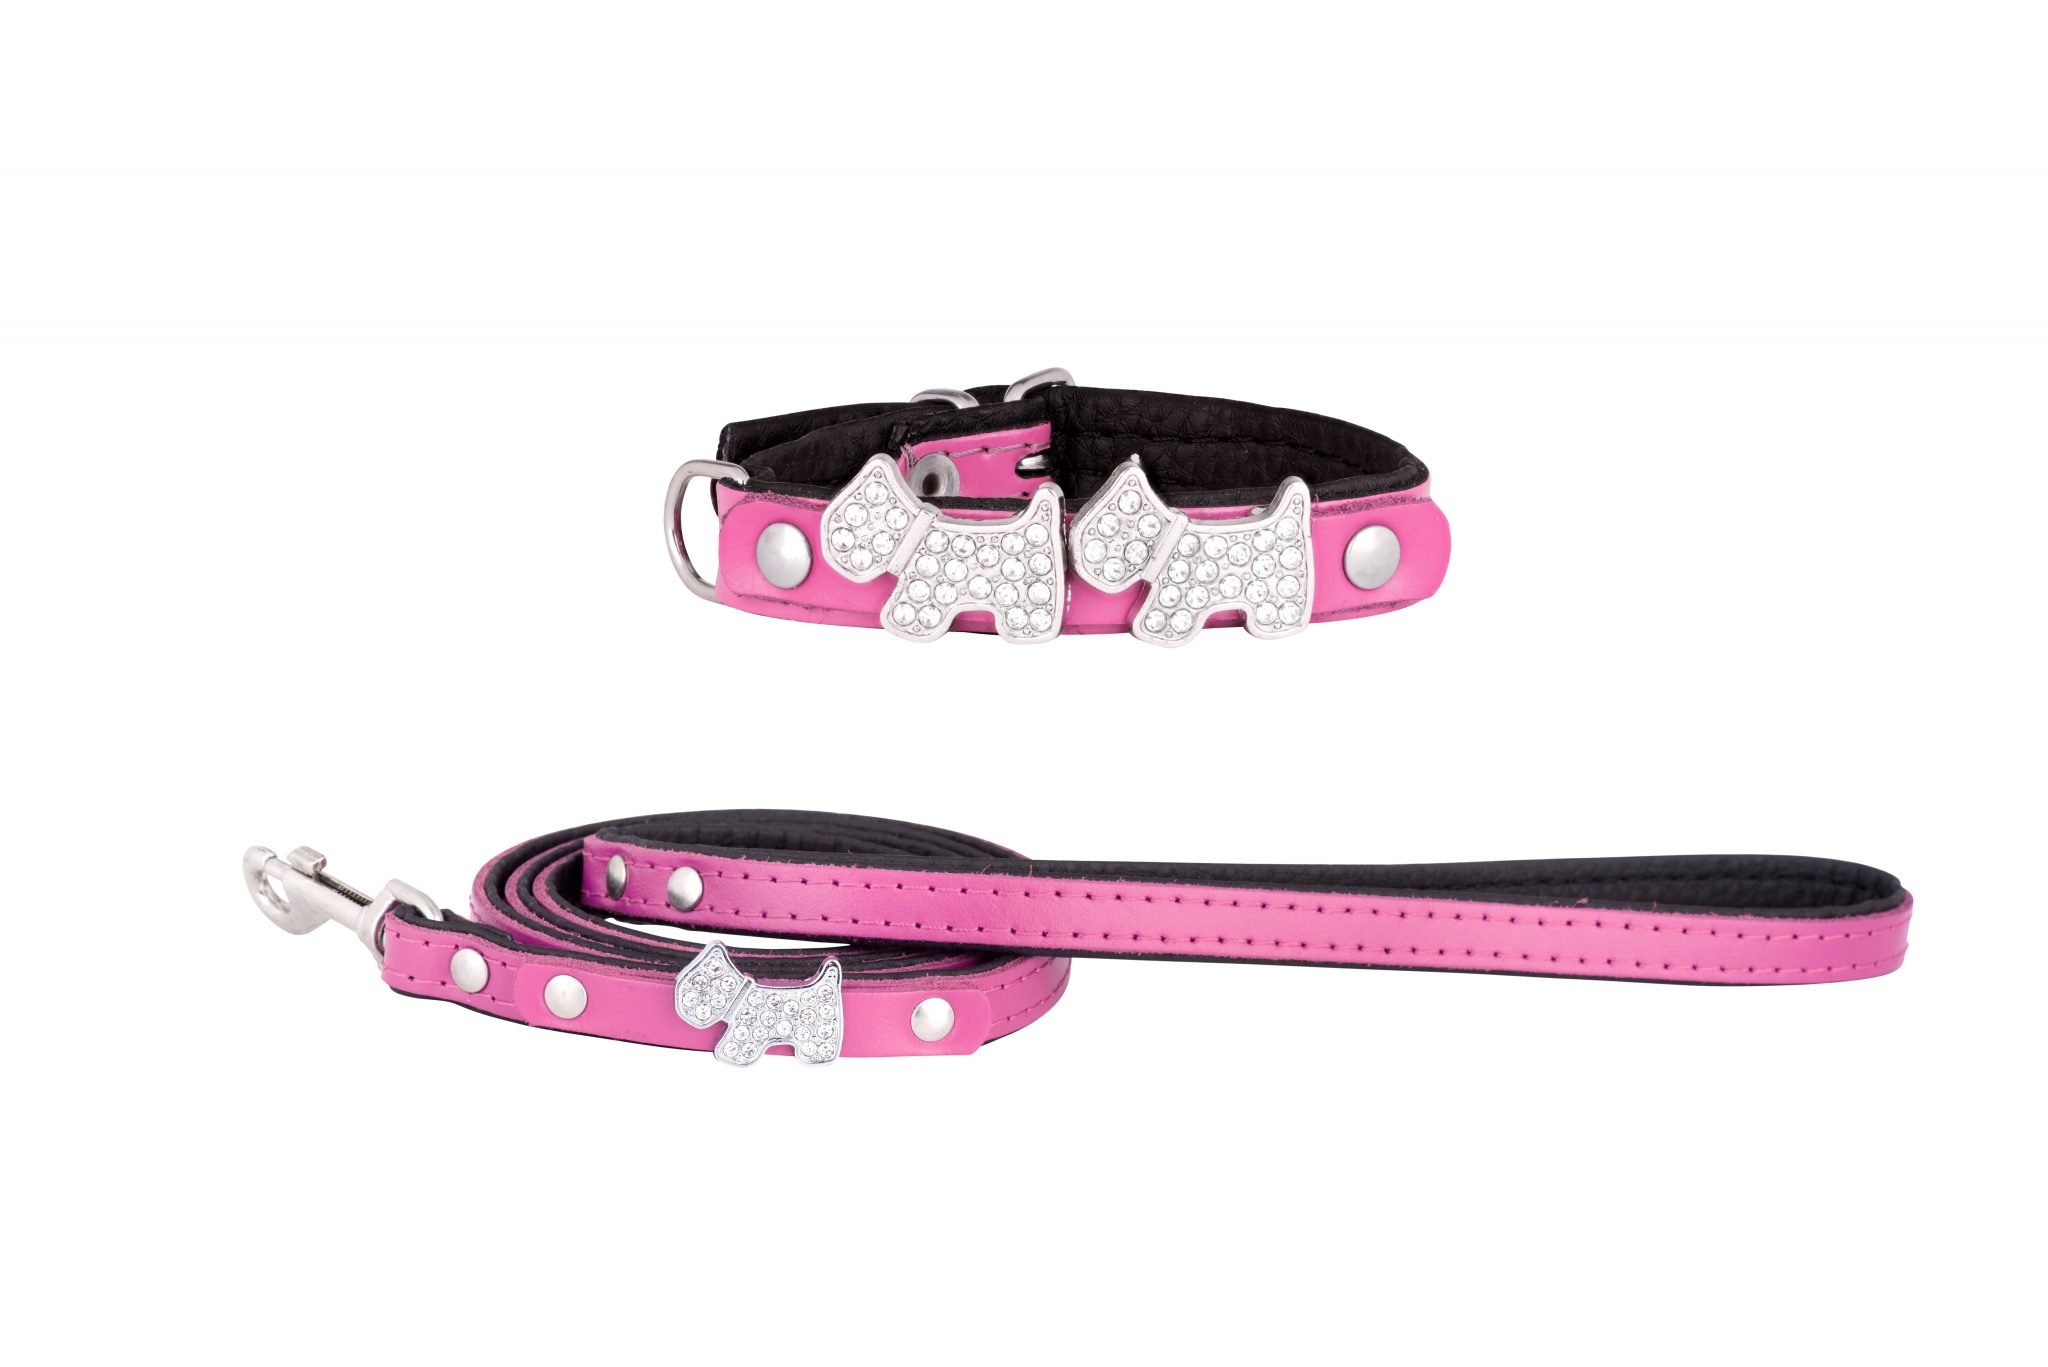 Highland designer leather dog collar and dog lead by IWOOF